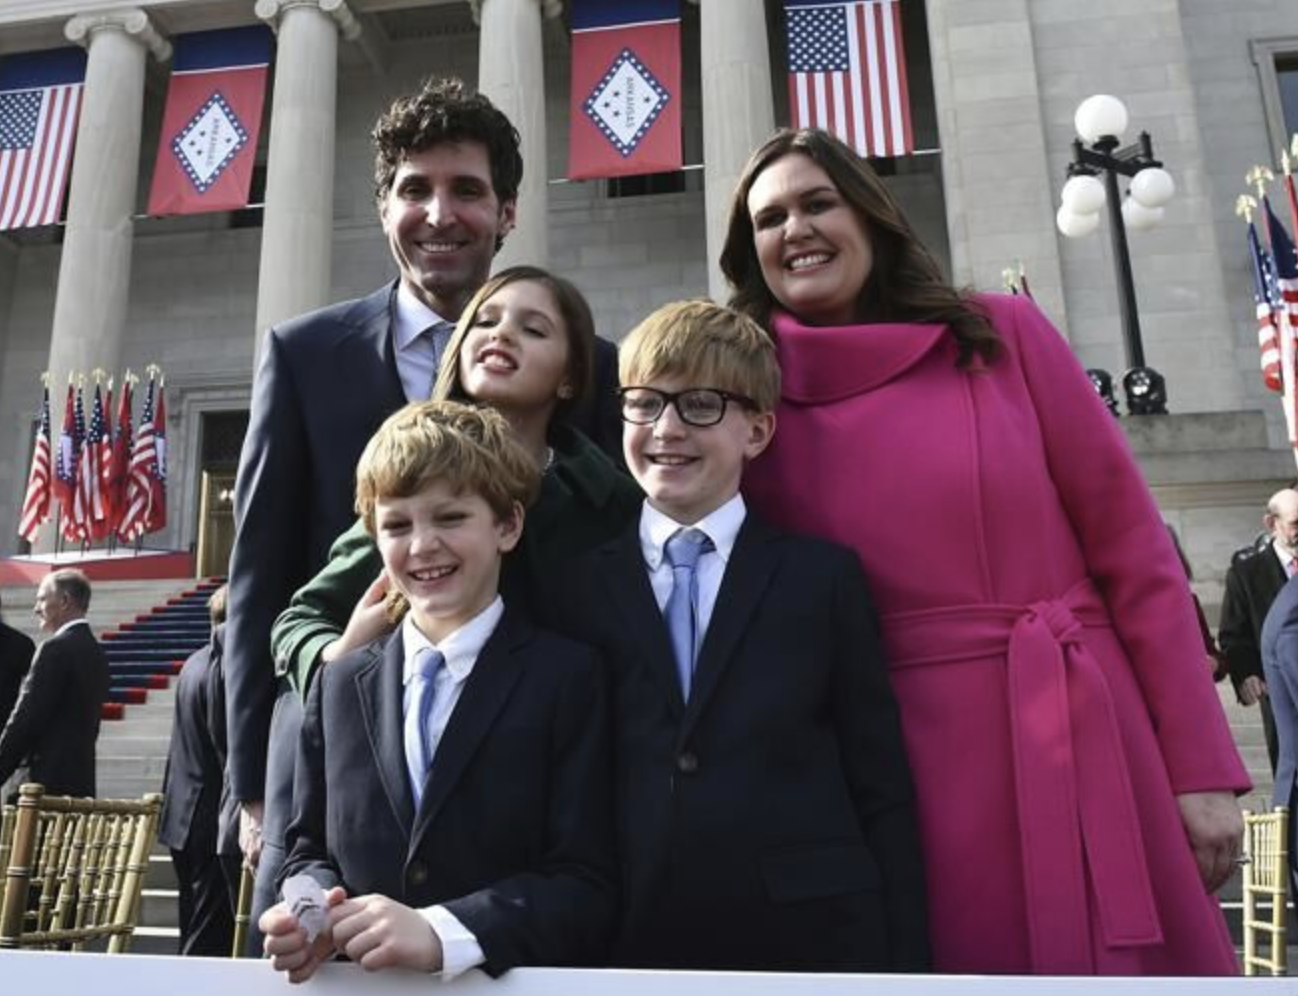 Arkansas Gov. Sarah Huckabee Sanders poses for a picture with husband Bryan and children Scarlett, Huck, and George